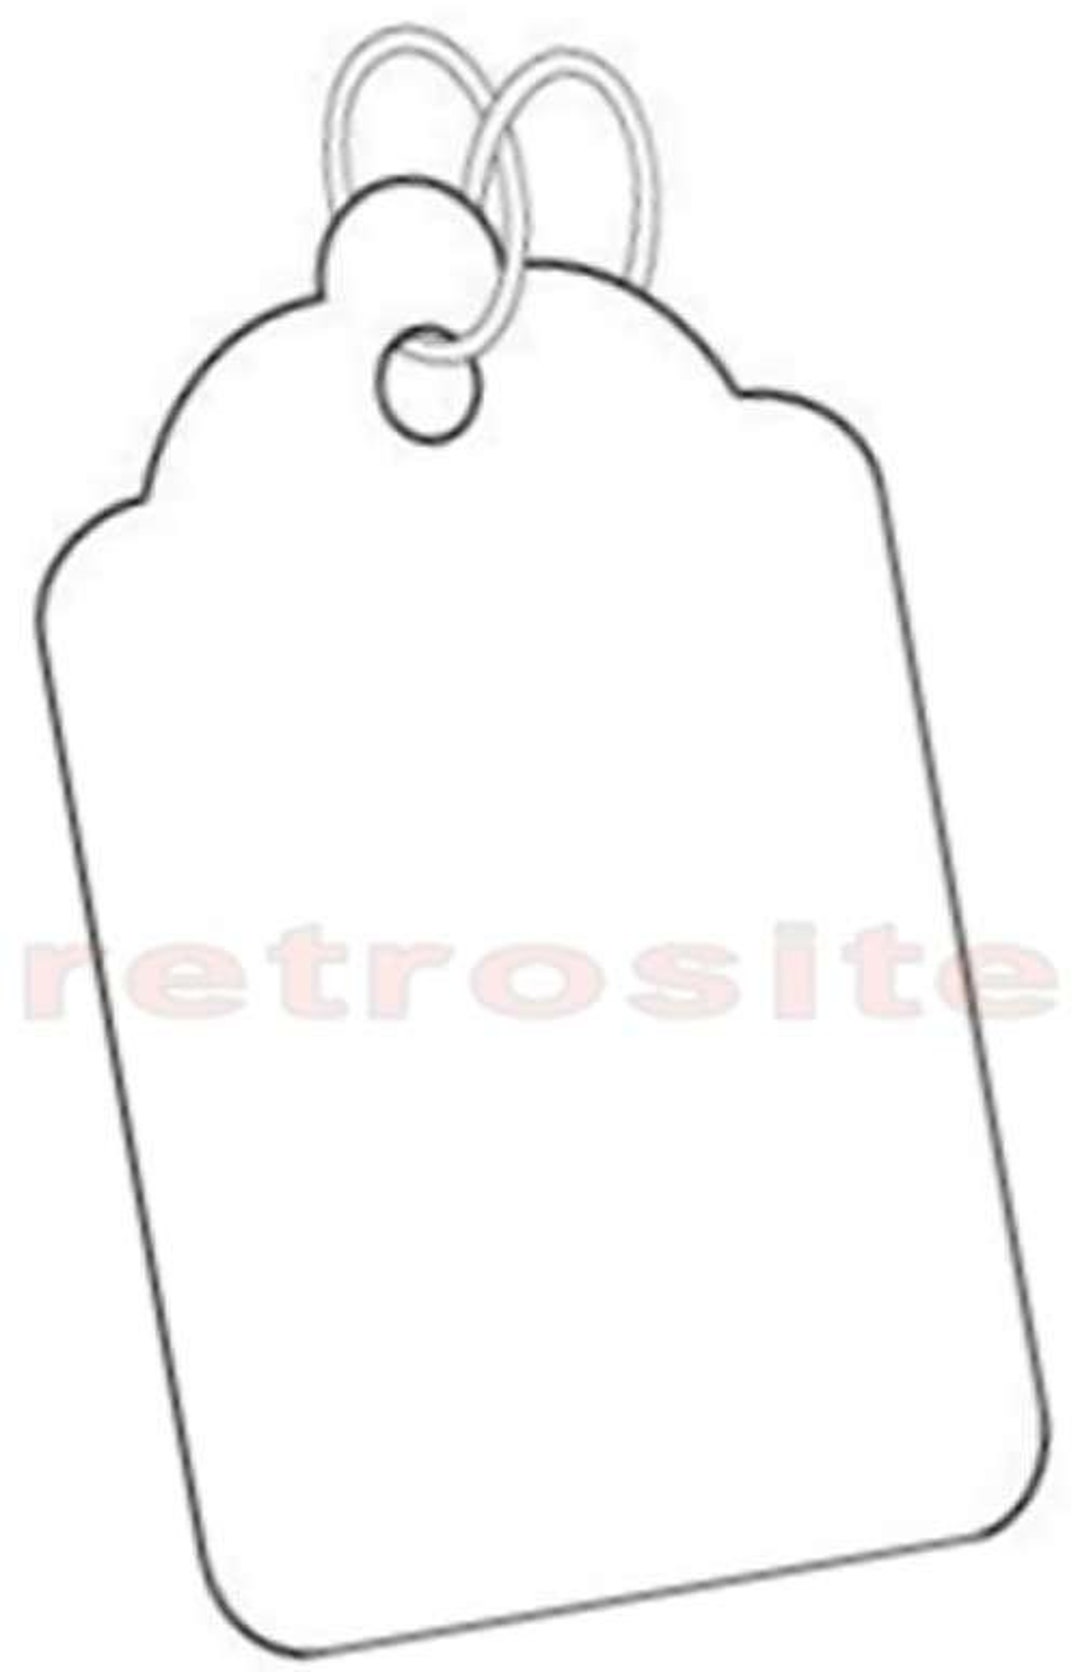 Pre-Strung Blank White Merchandise Price Tags Large Small Hang String  Jewelry